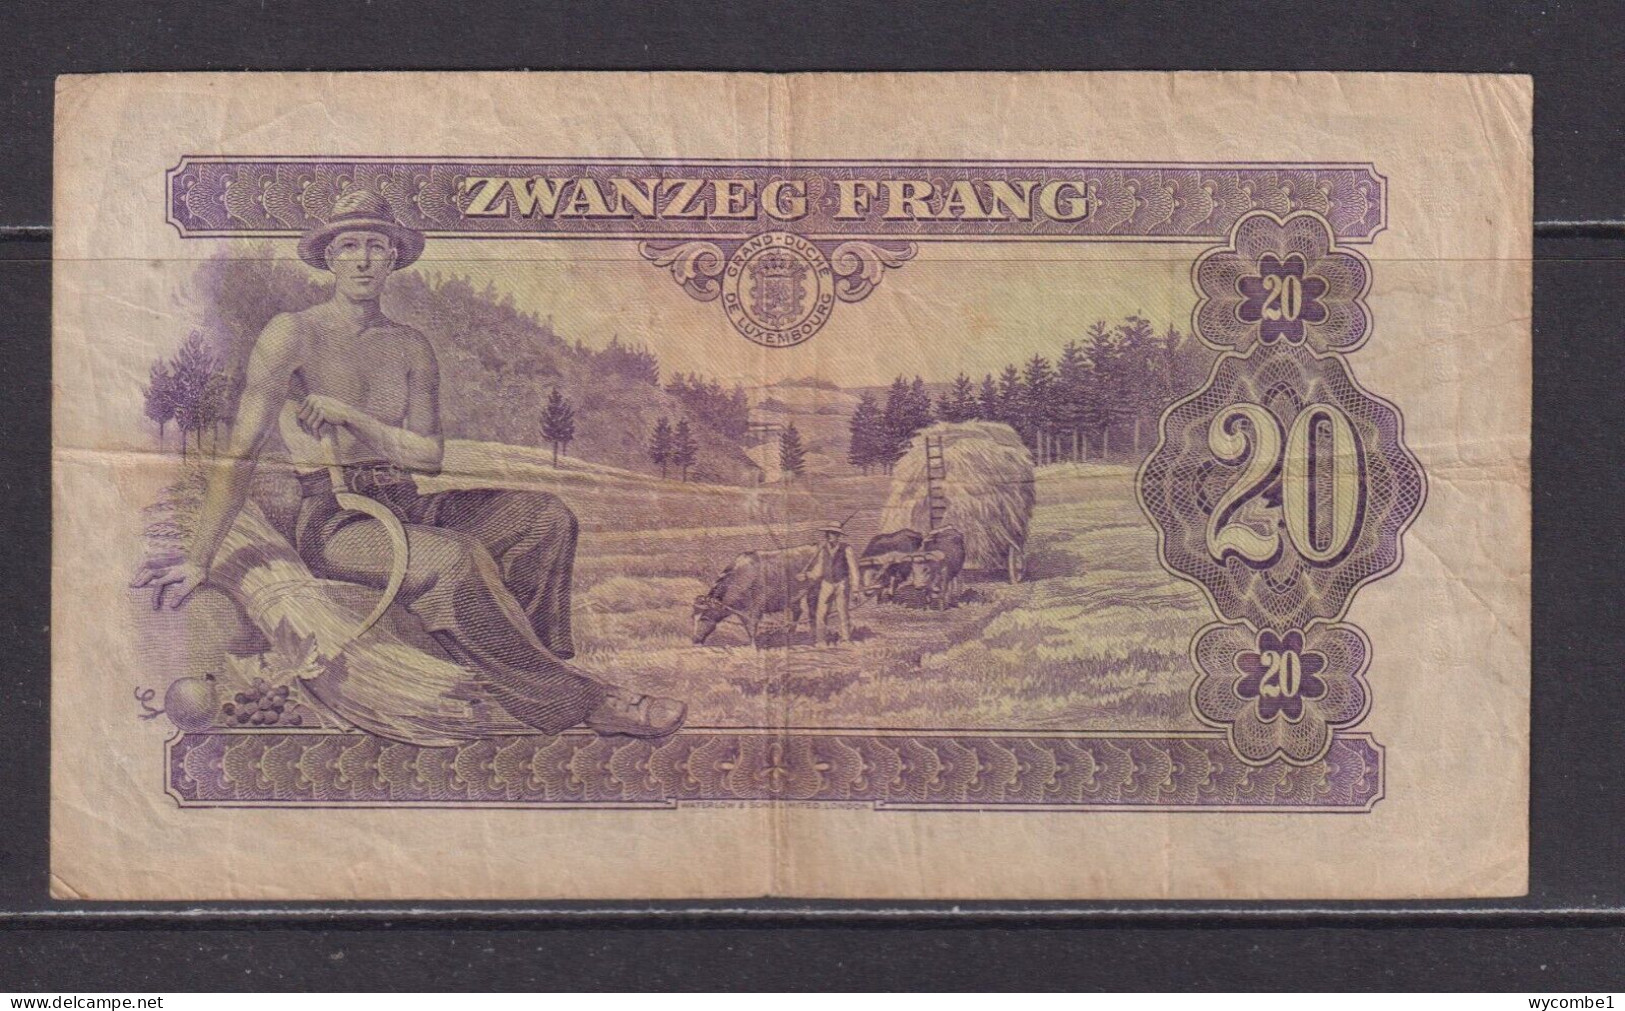 LUXEMBOURG - 1943 20 Francs Circulated Banknote - Luxemburg